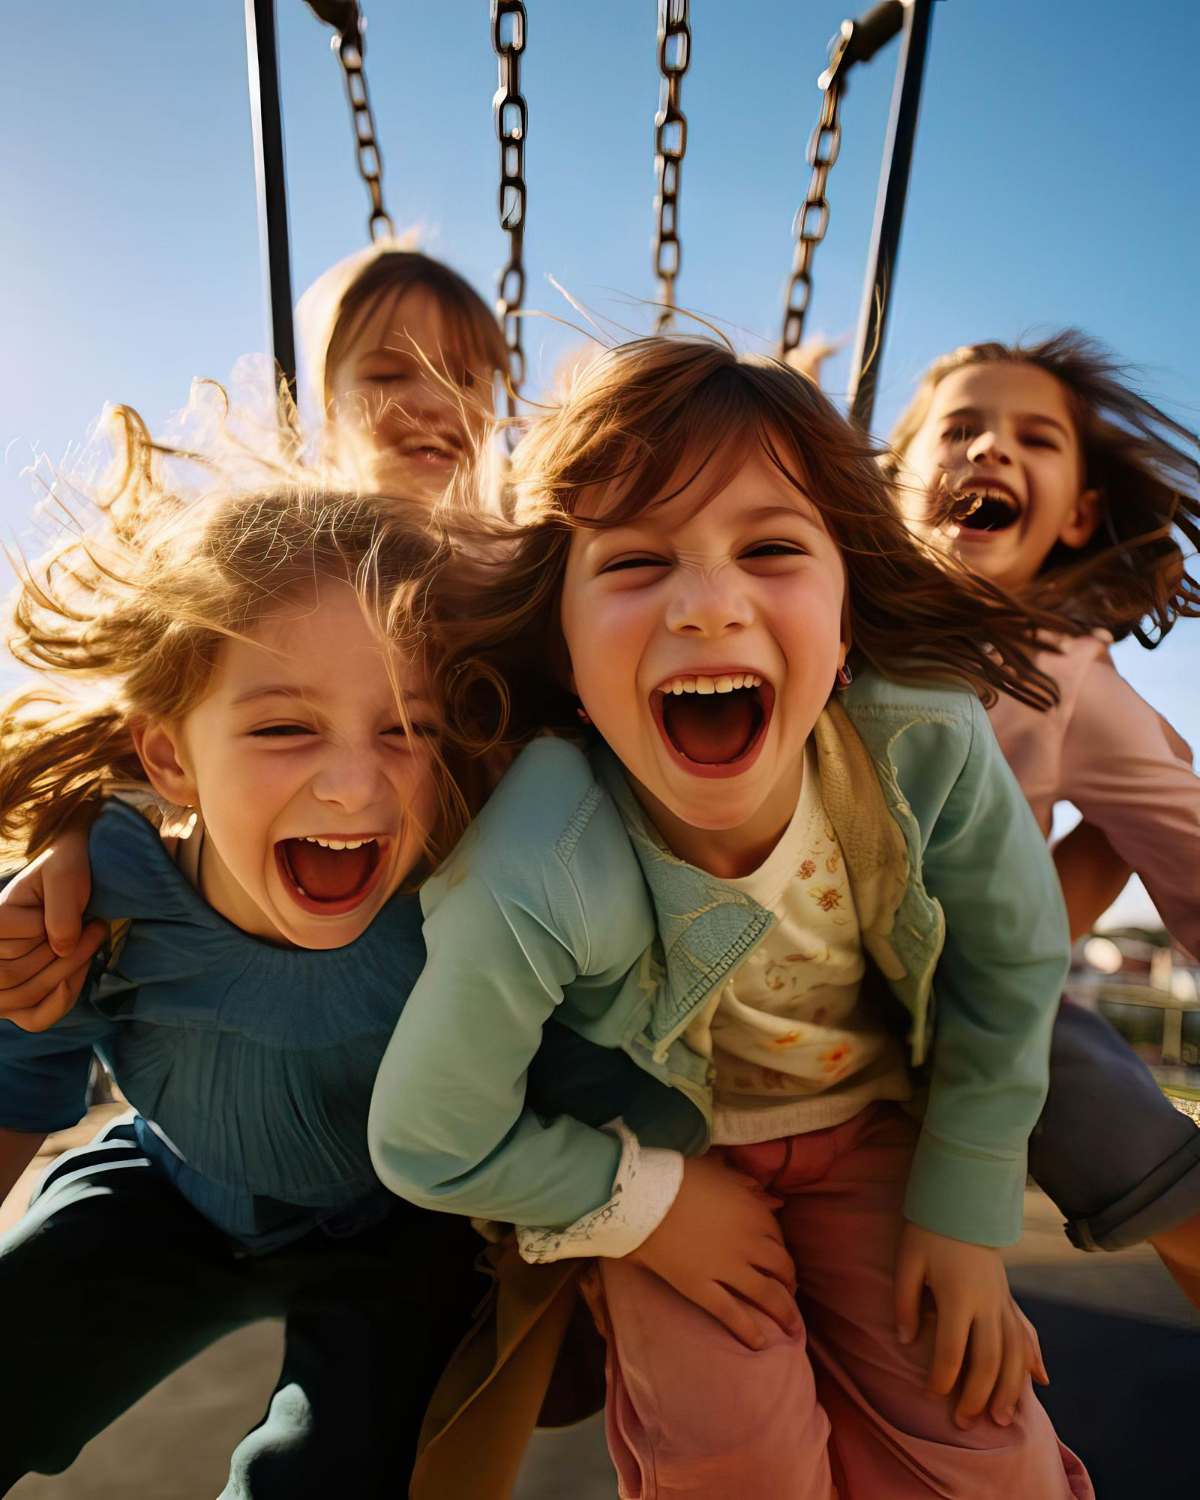 Children playing near a swing set, all the girls are happy and having fun.